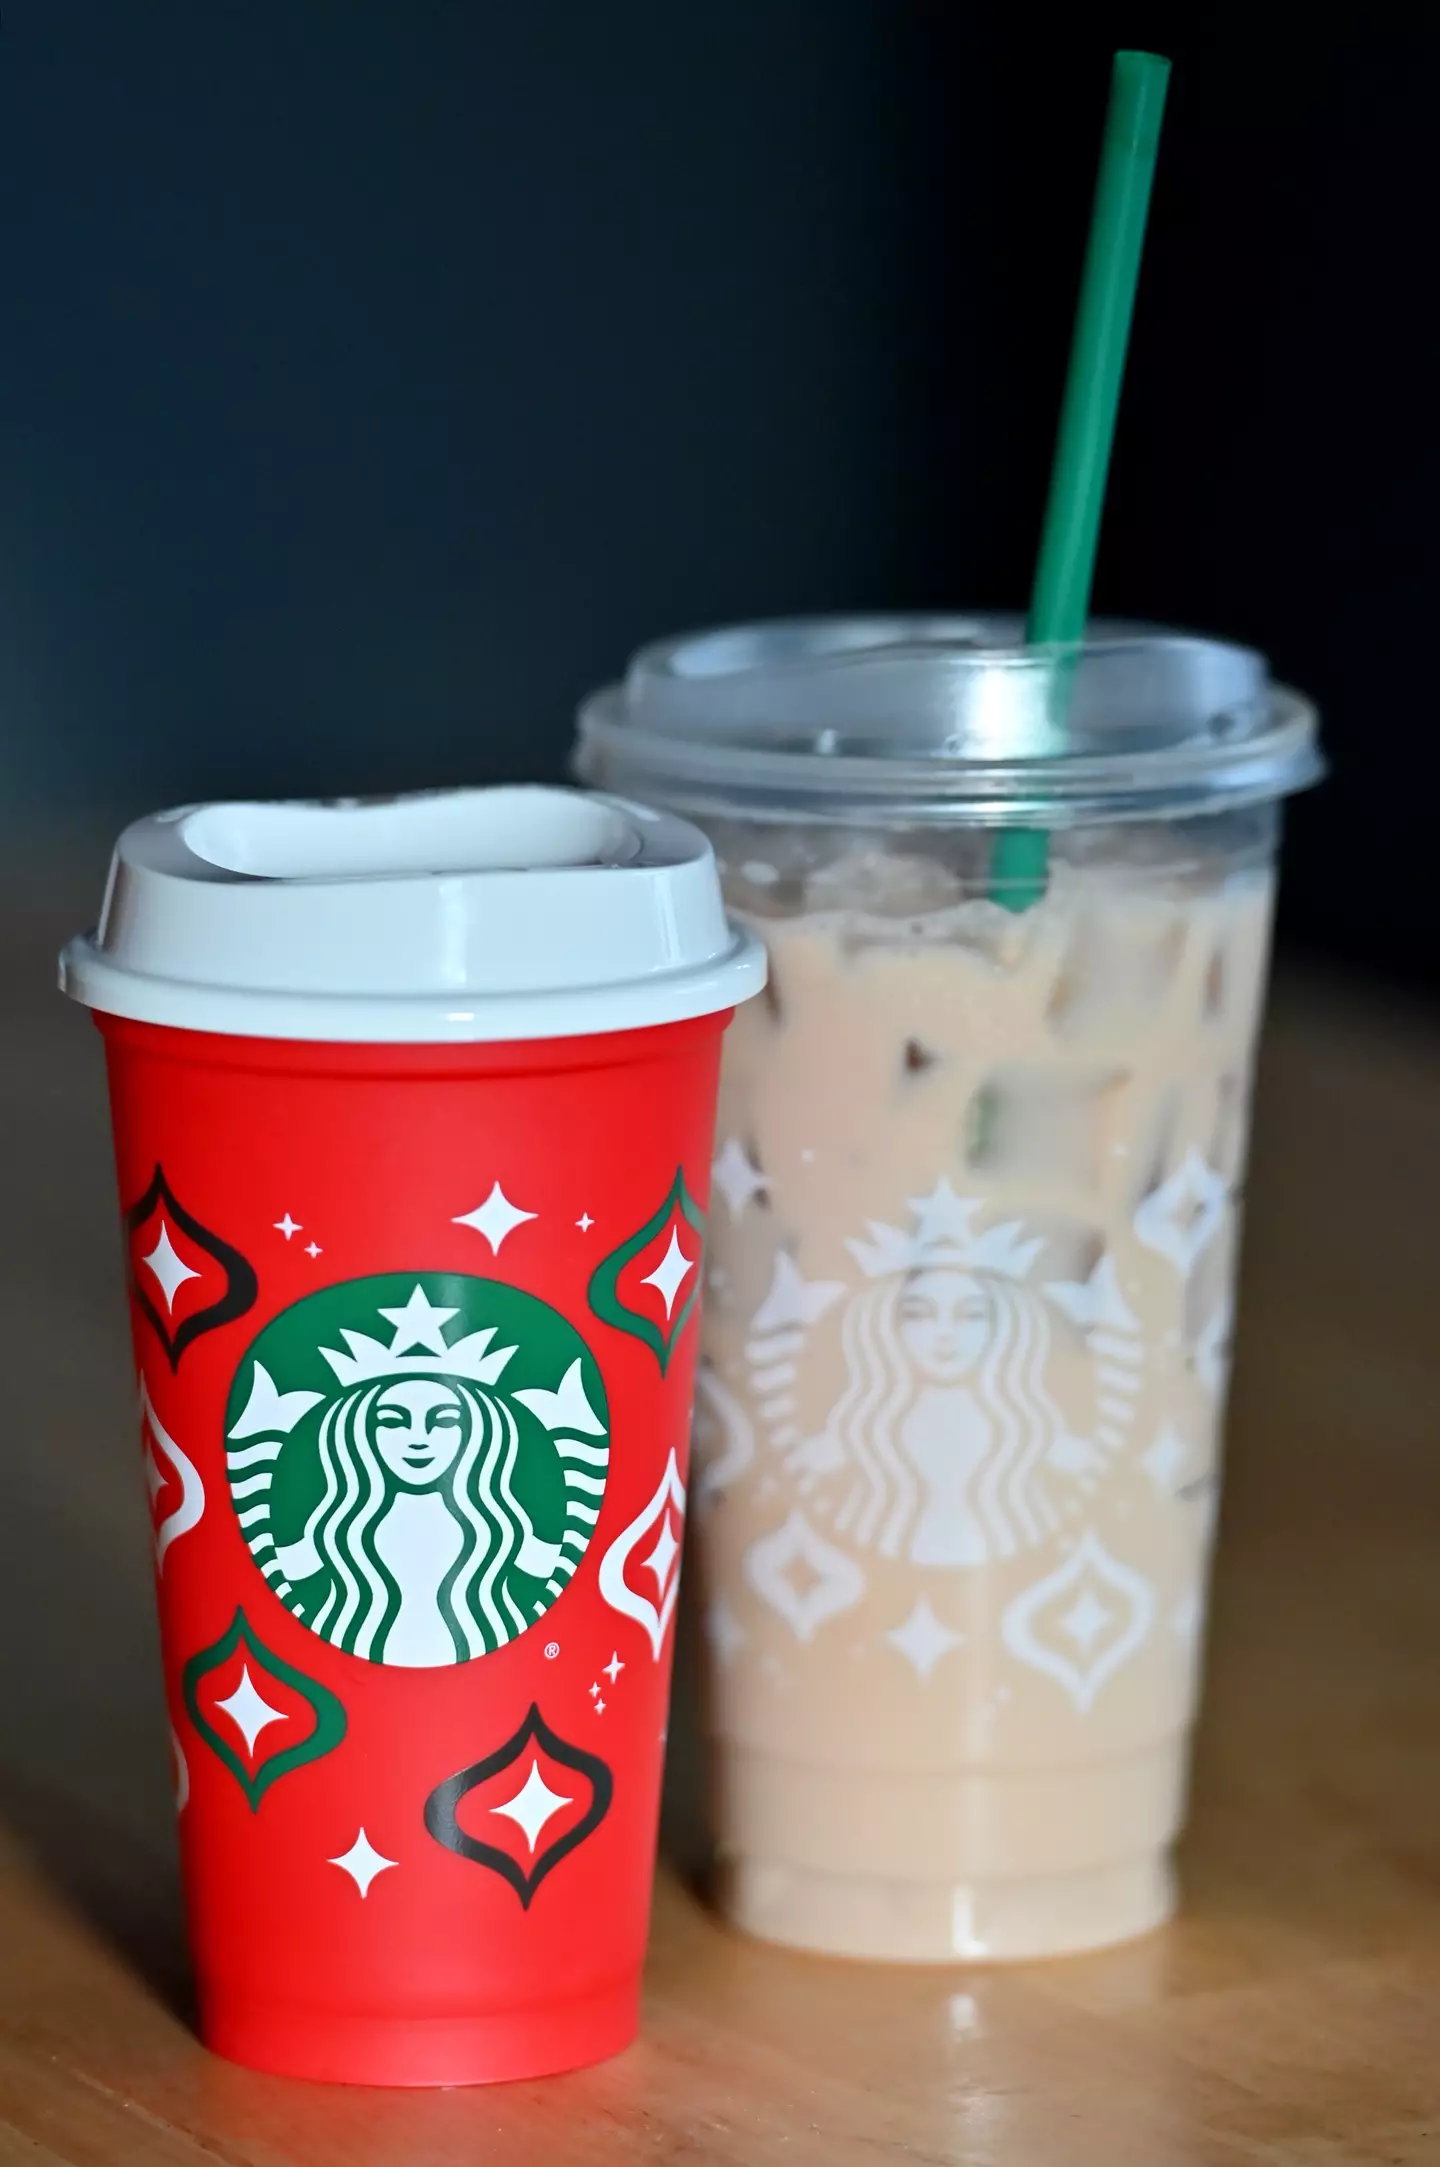 How to cash in on Starbucks' 50% off drink deal Thursday